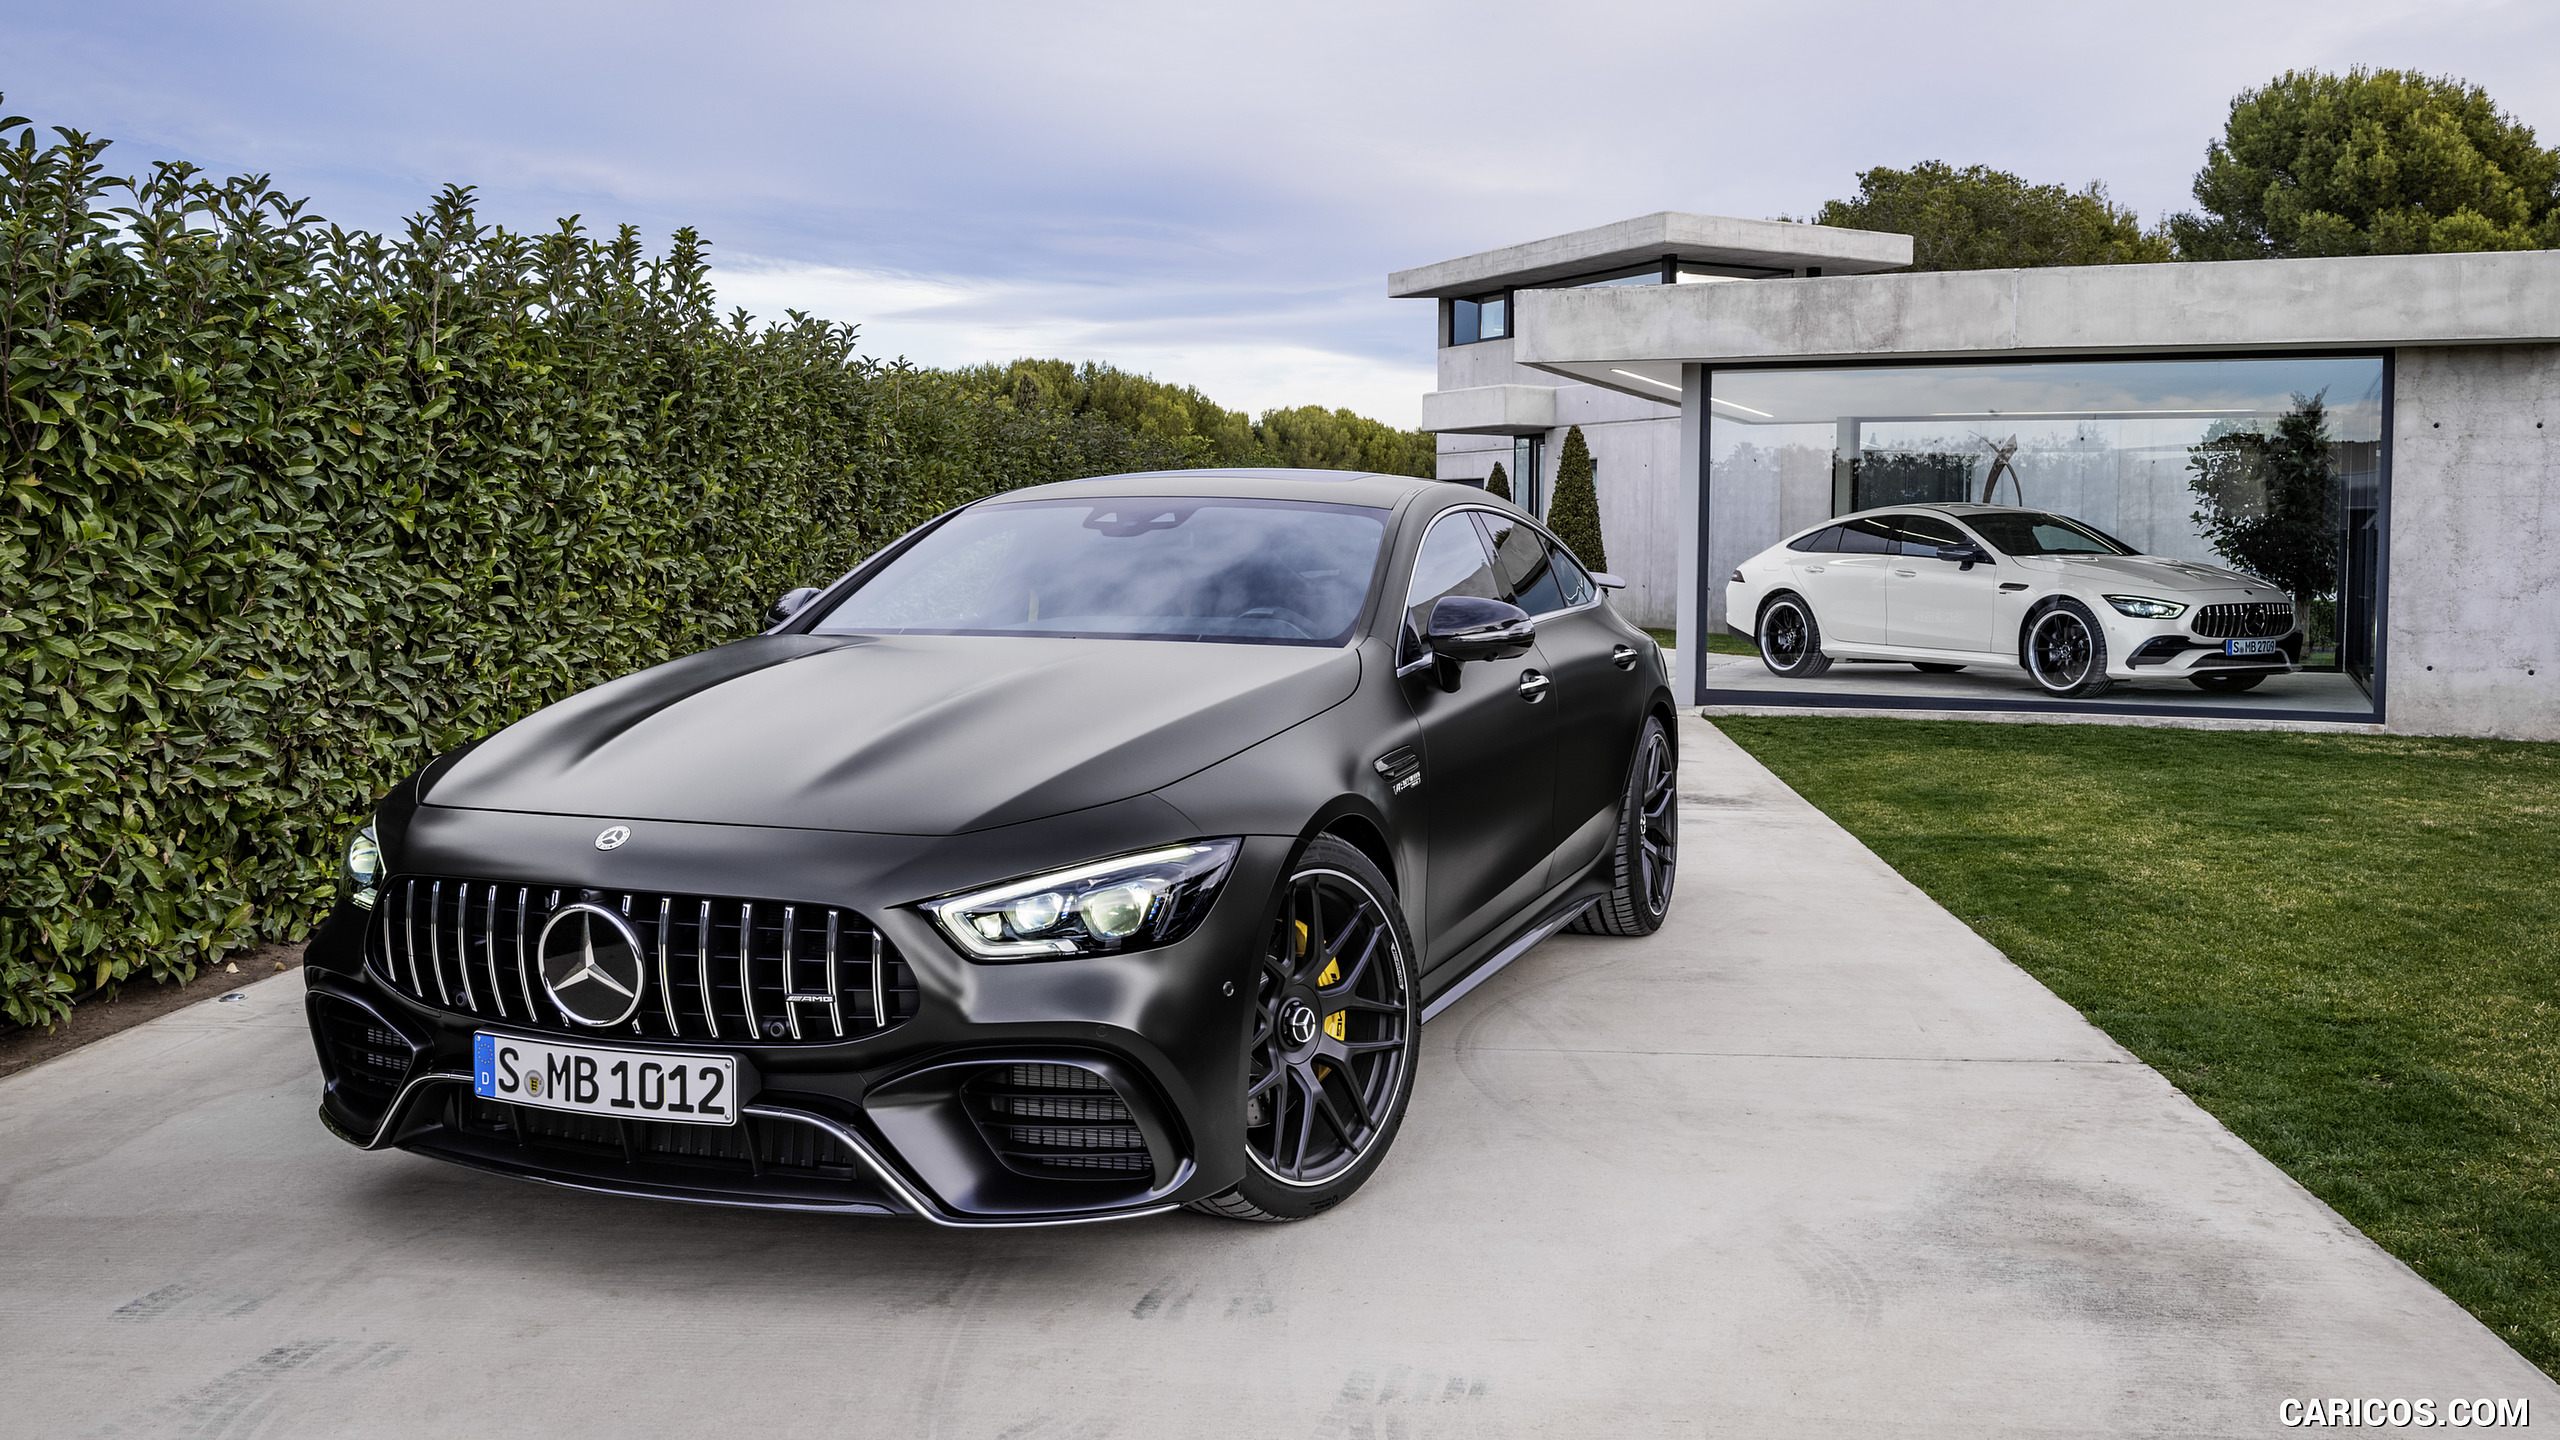 Mercedes AMG GT 63 And 53 4MATIC+ 4 Door Coupe. HD Wallpaper